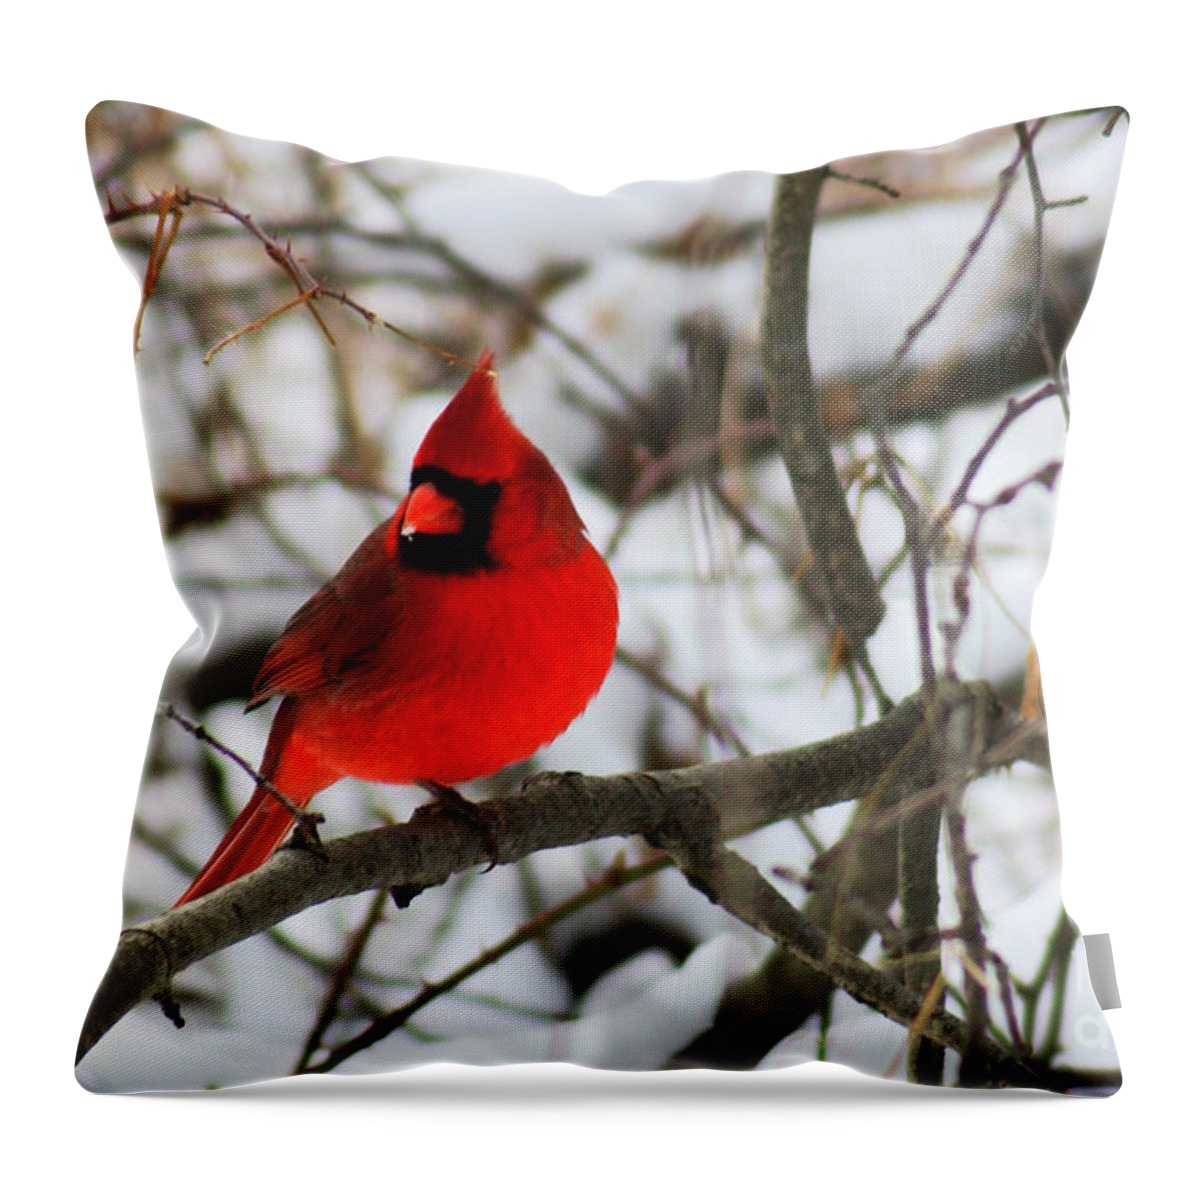 Alyce Taylor Throw Pillow featuring the photograph A Little Bit of Colour by Alyce Taylor